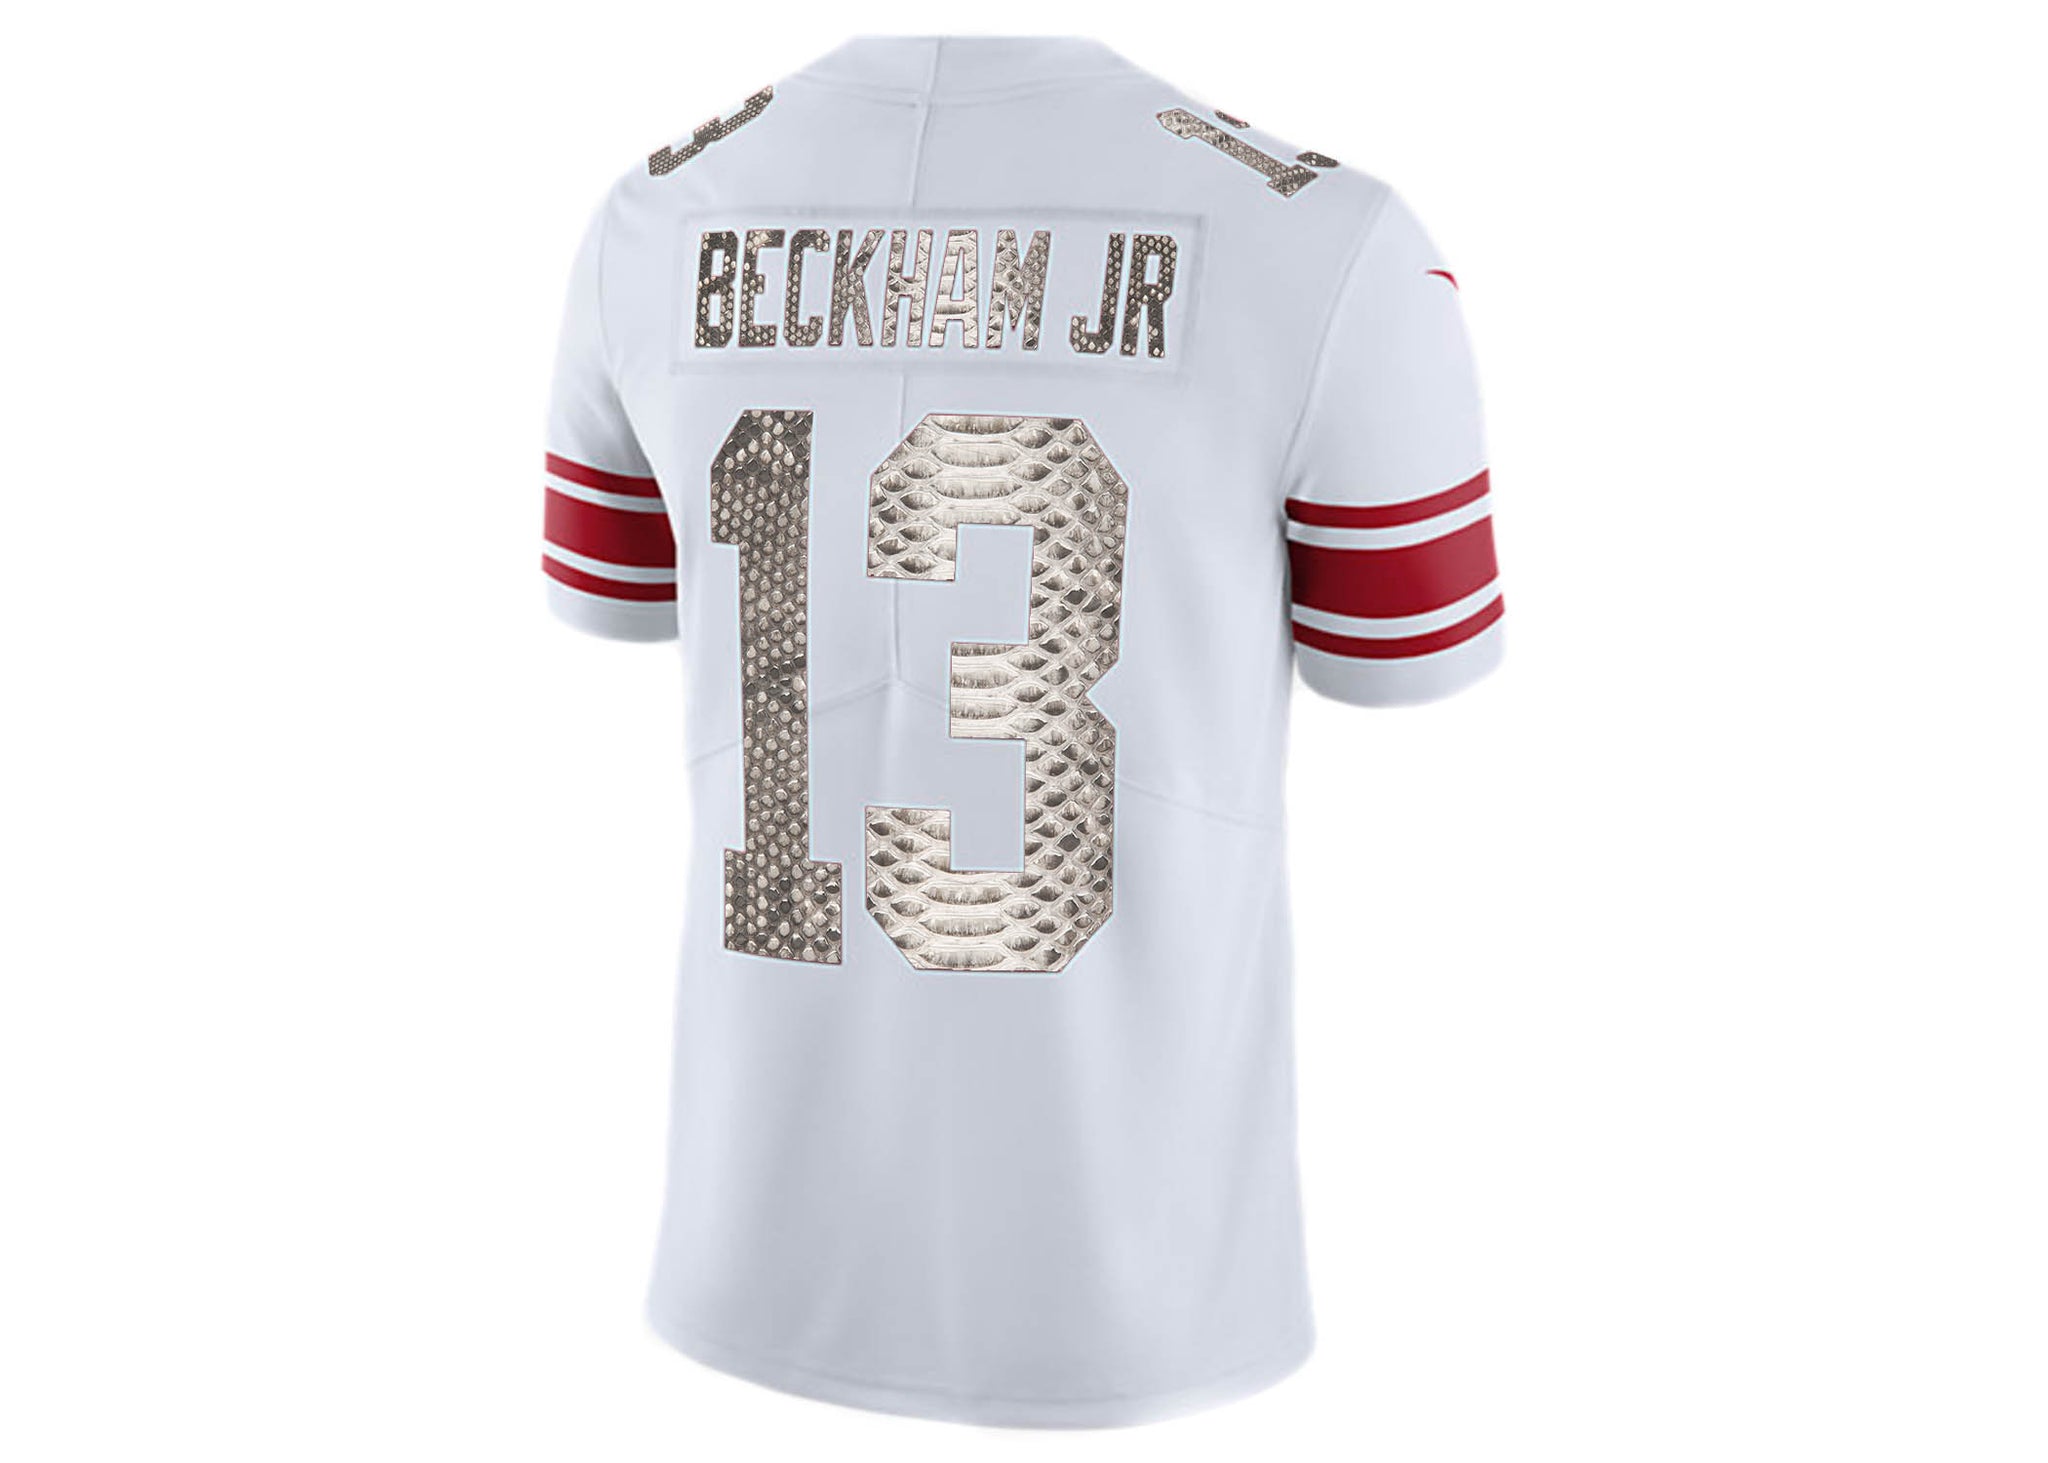 white and red giants jersey